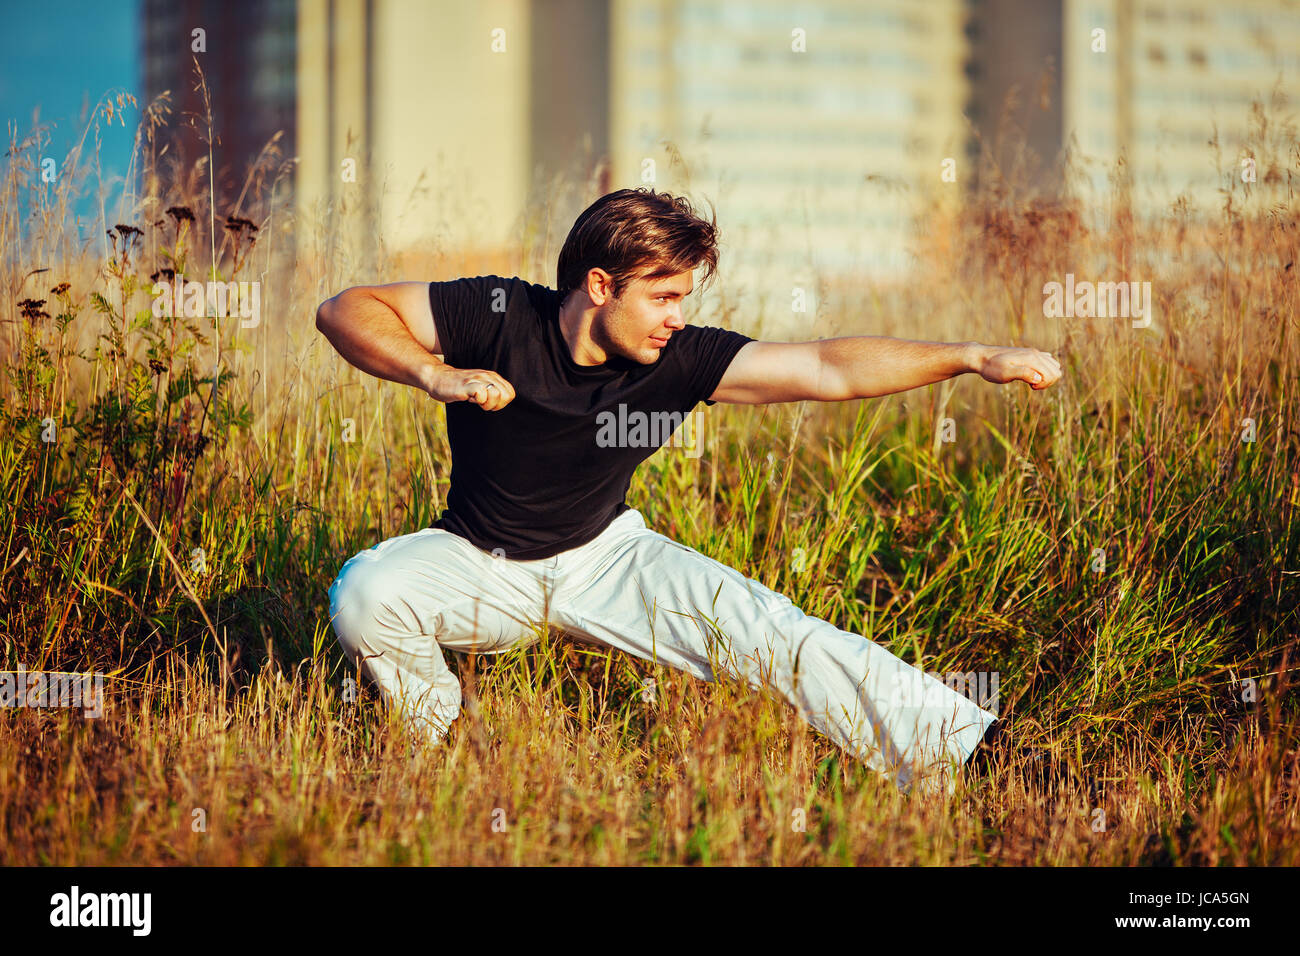 Young athletic man martial art training outdoors at grass field Stock Photo